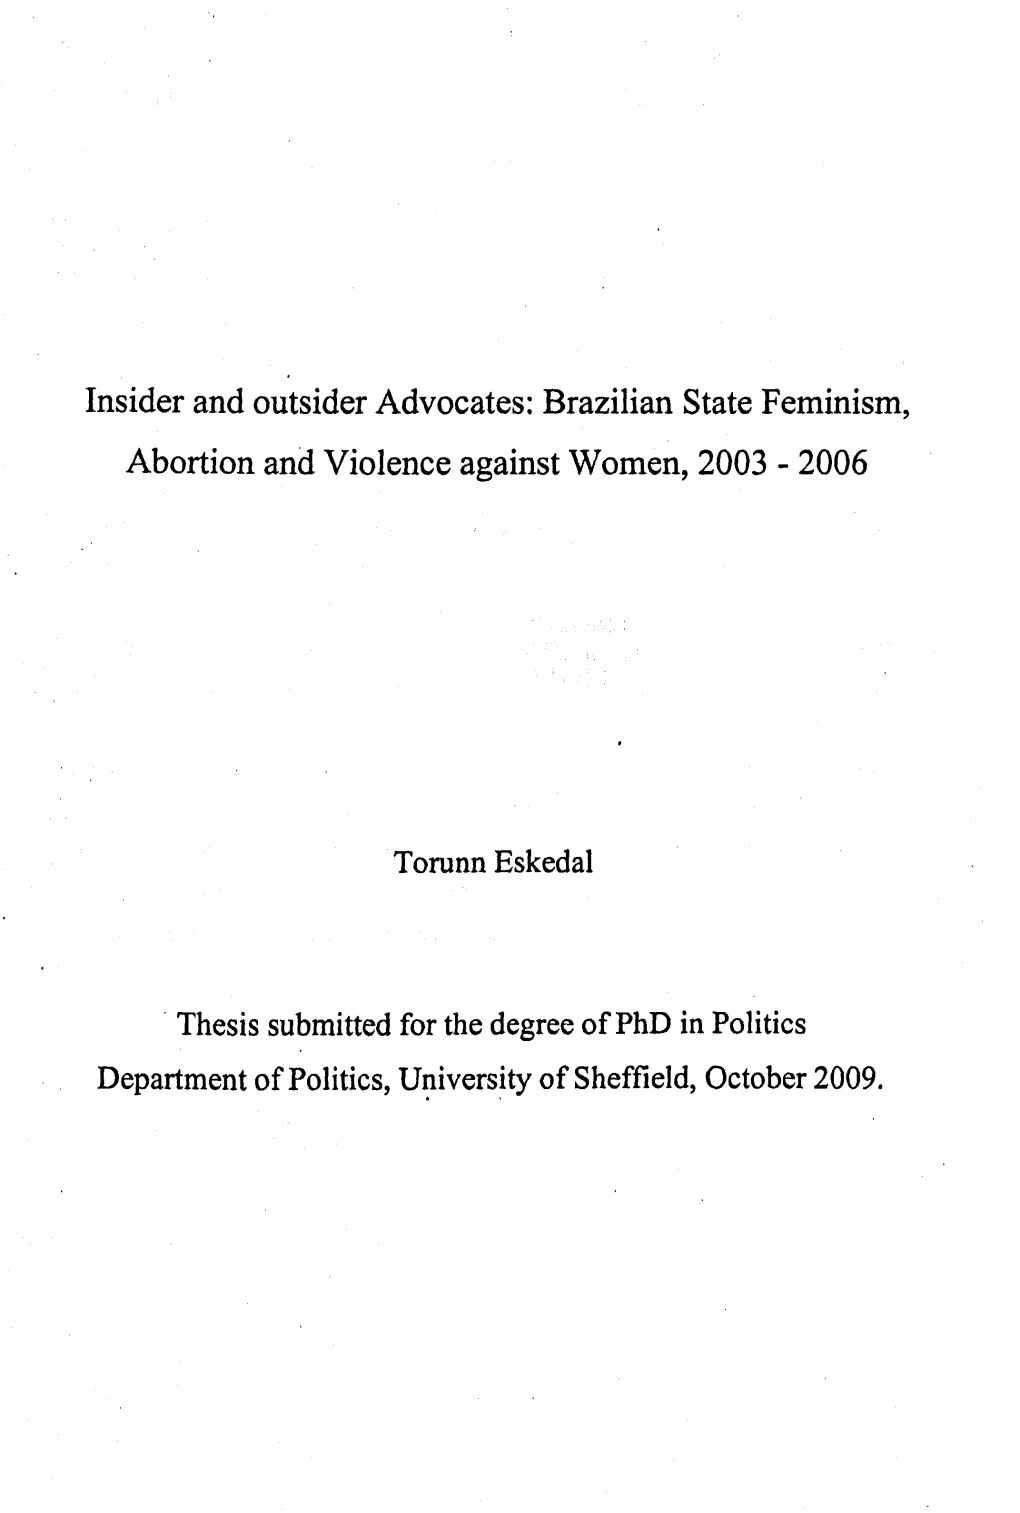 Brazilian State Feminism, Abortion and Violence Against Women, 2003 - 2006